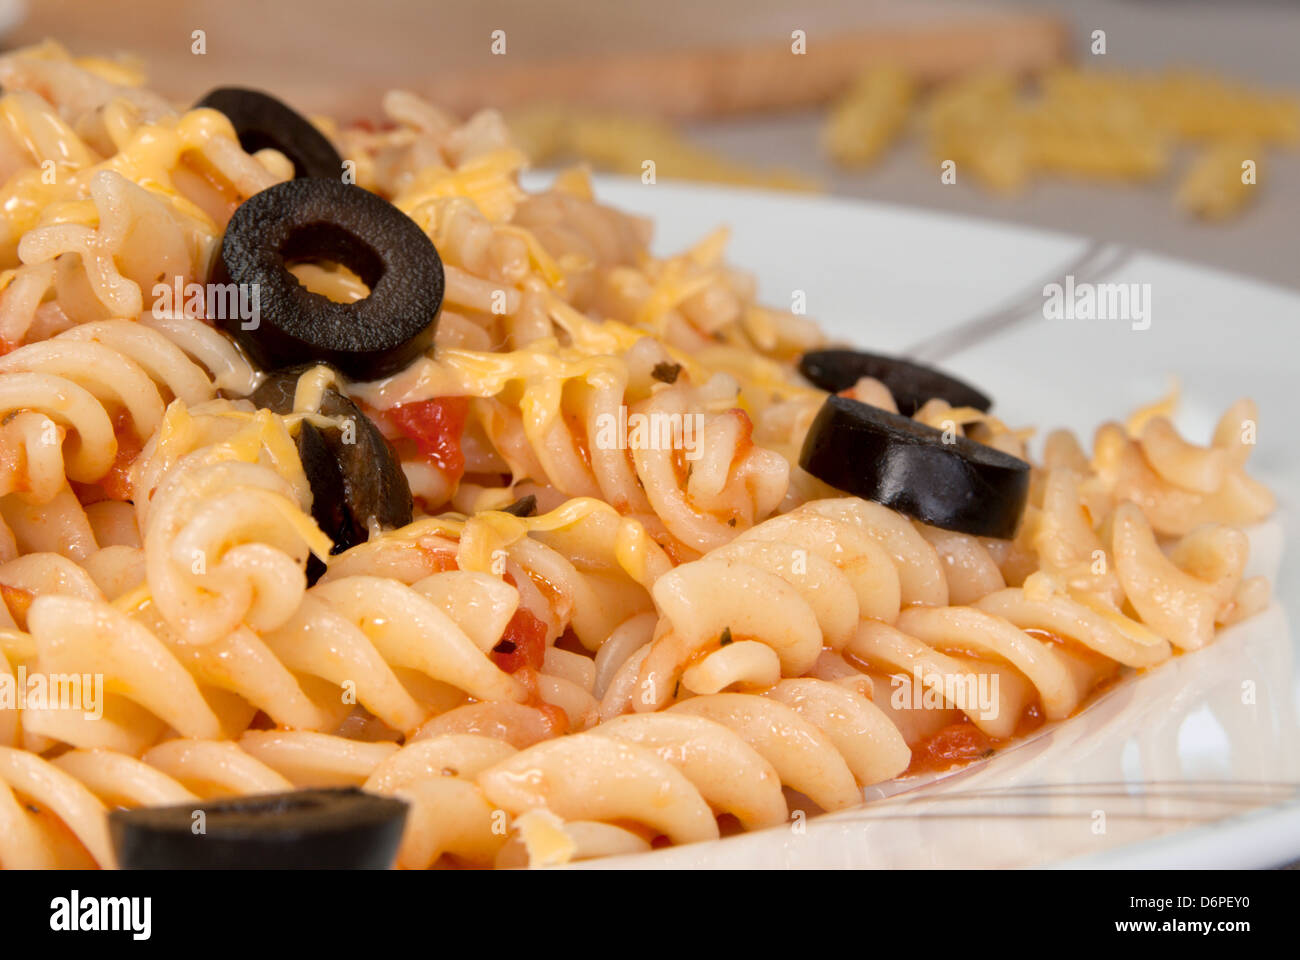 Pasta with tomato, garlic and black olives Stock Photo